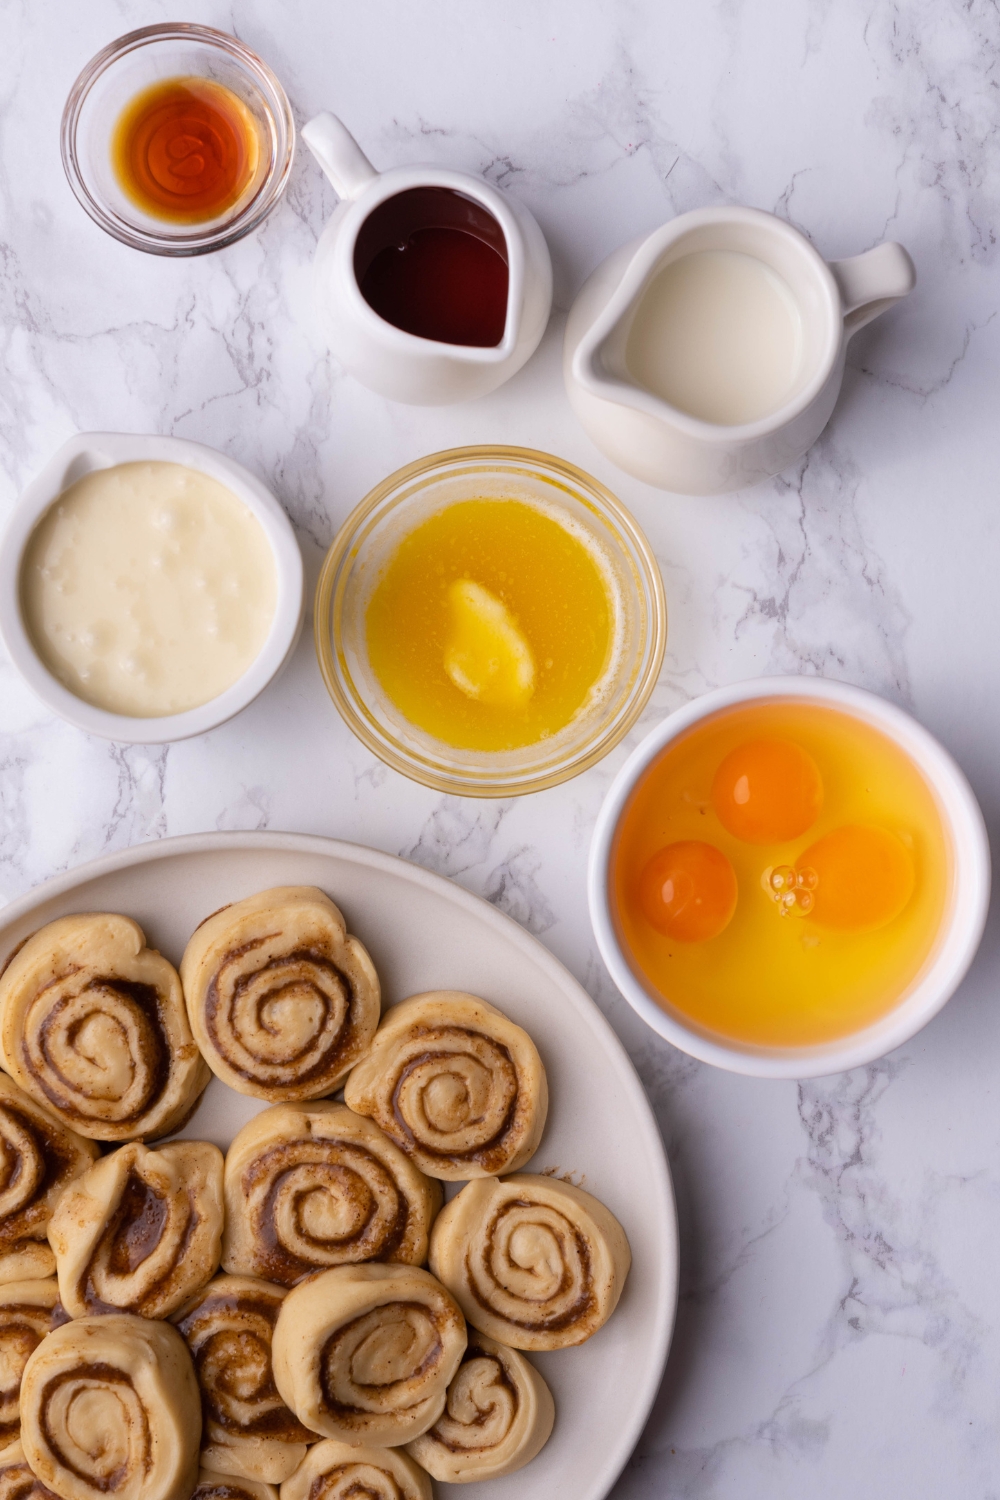 A bowl of maple syrup, a bowl of vanilla extract, a bowl of eggs, a bowl of malted butter, and part of a plat with cinnamon rolls on it.